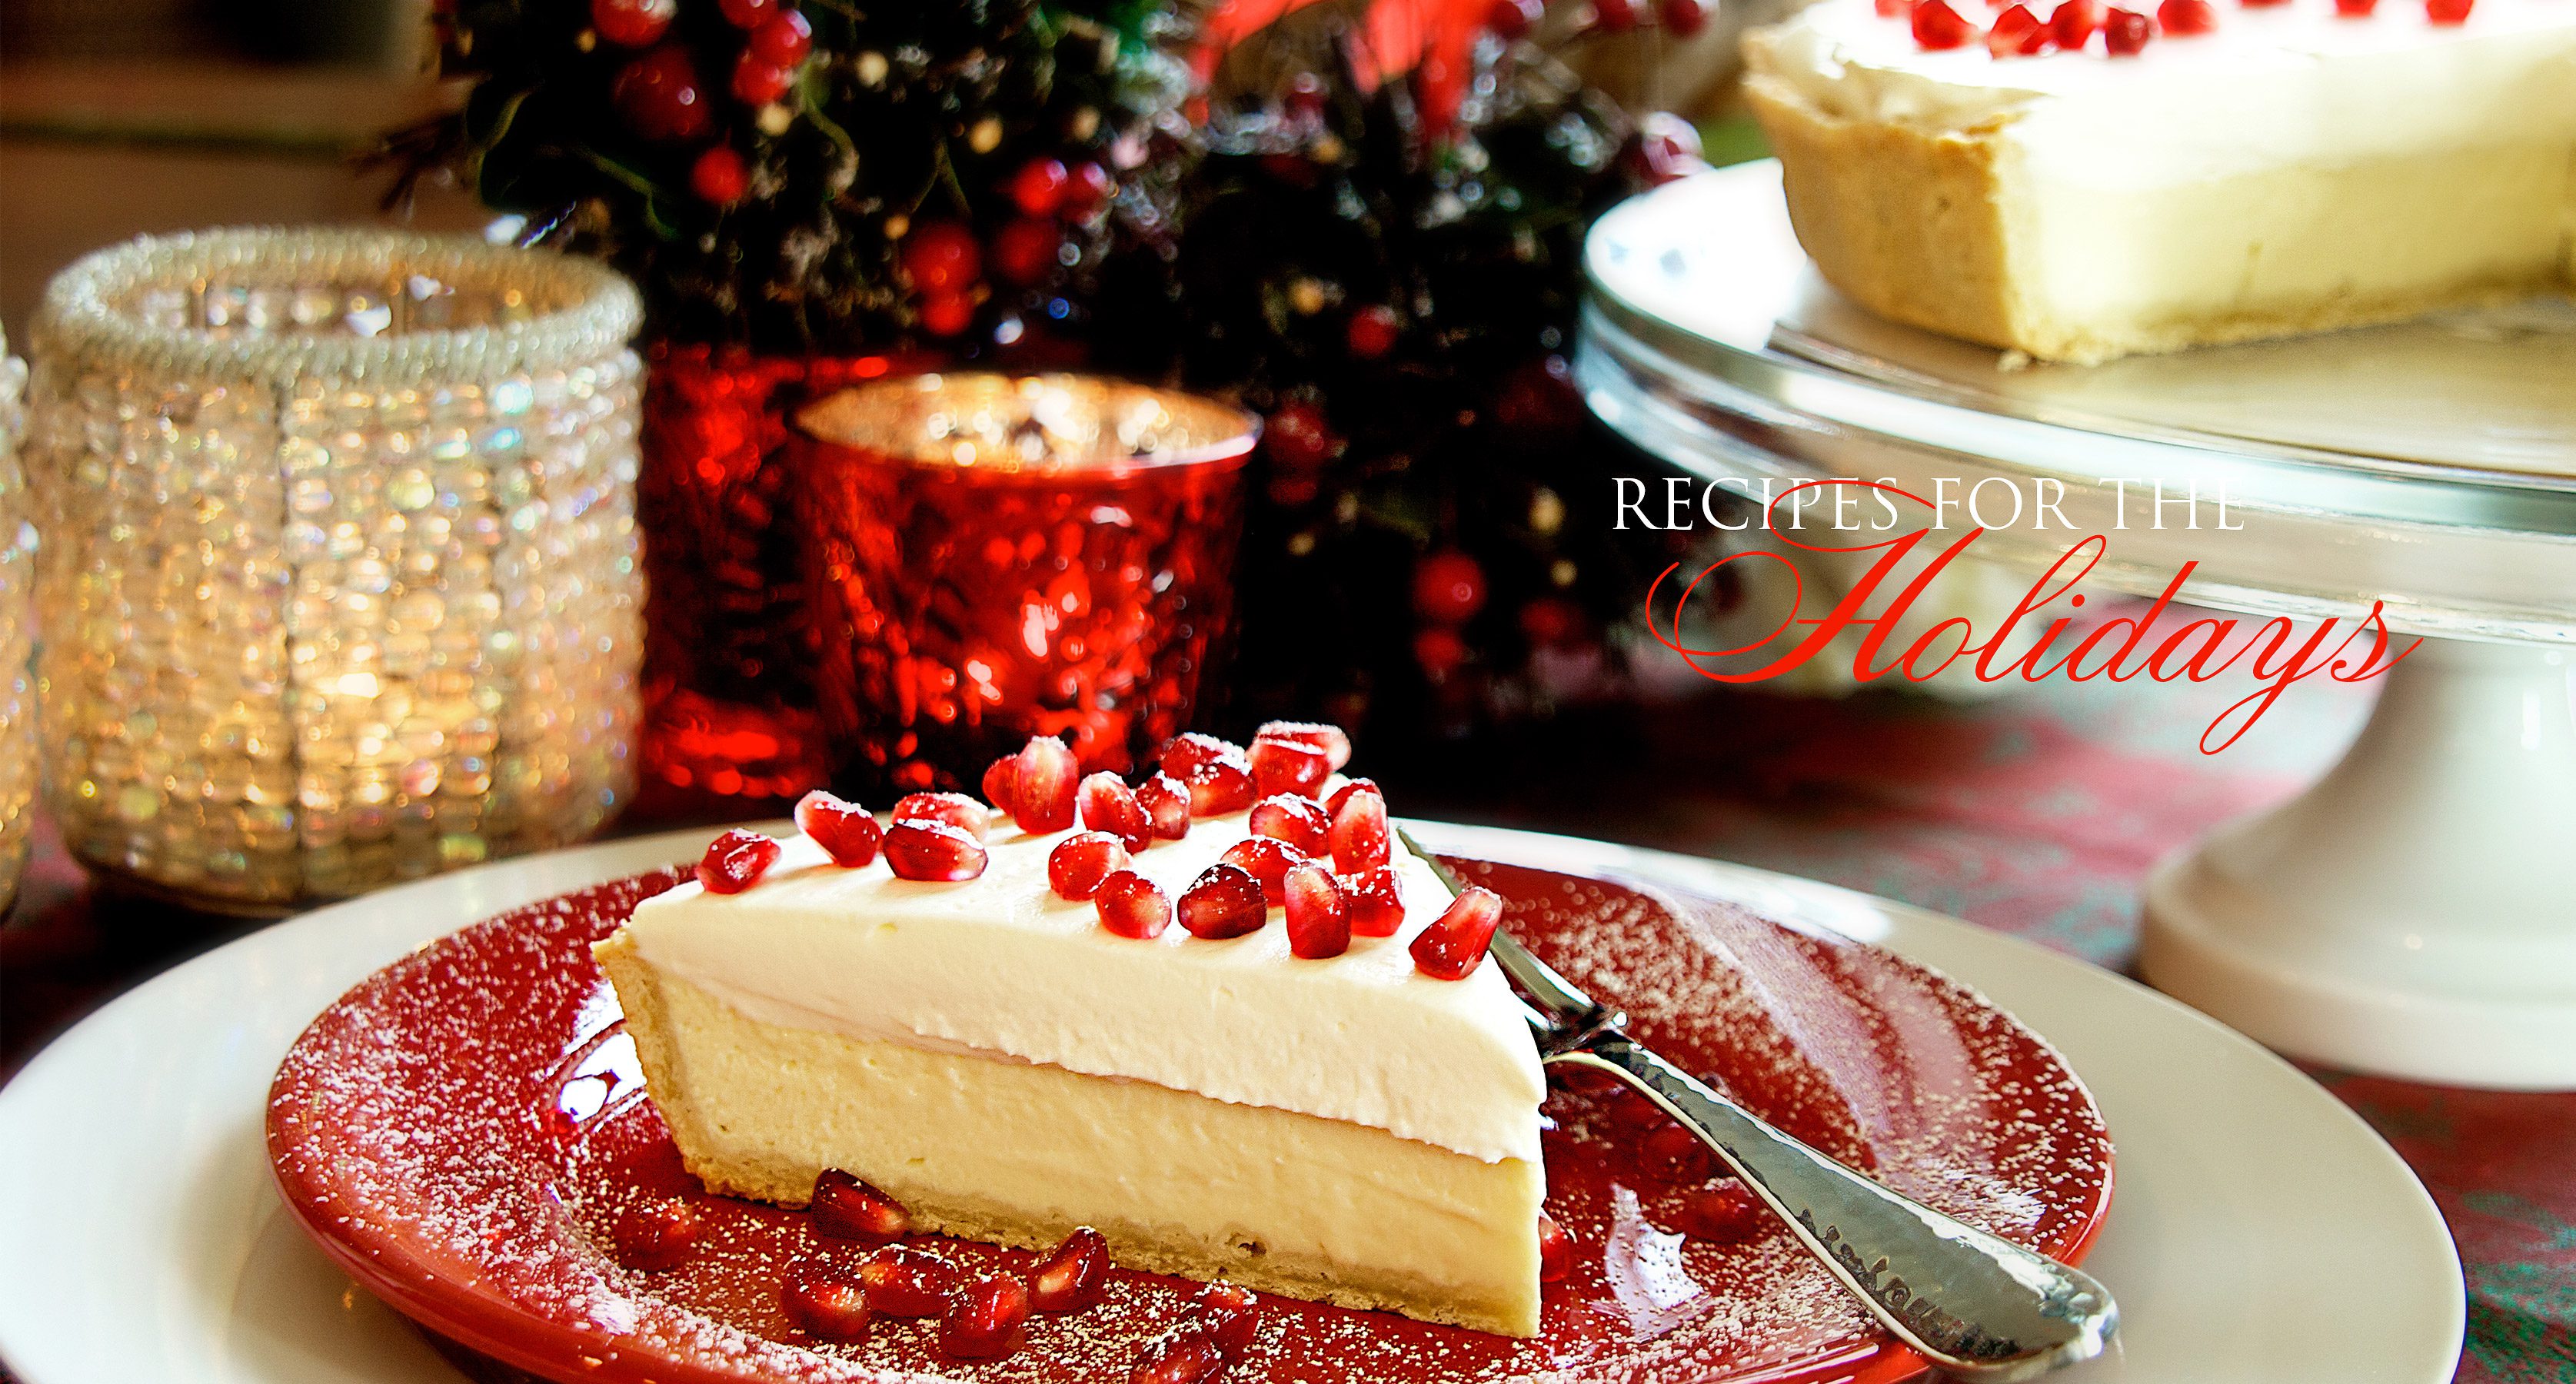 Coconut-Cream-tart-with-pomegranate-a-recipe-for-the-Holidays